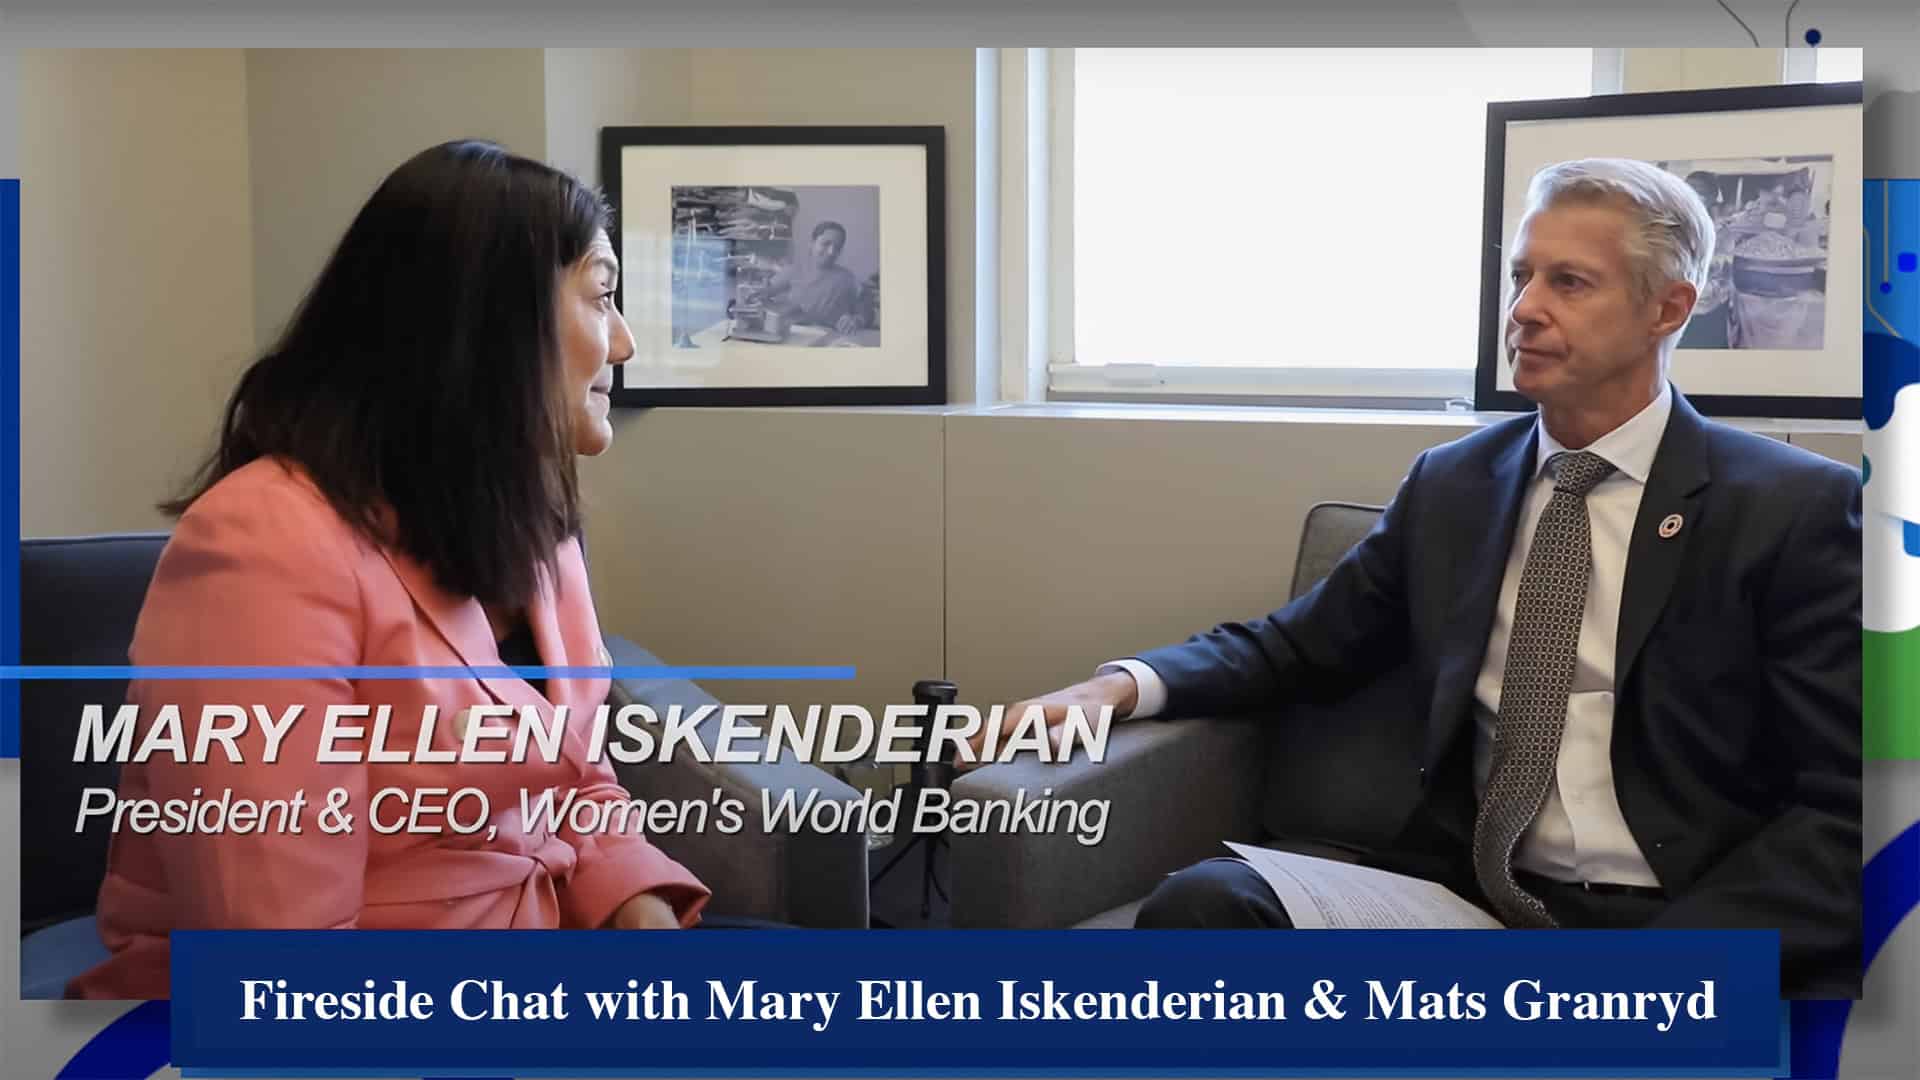 Fireside Chat with Mary Ellen Iskenderian and Mats Granryd